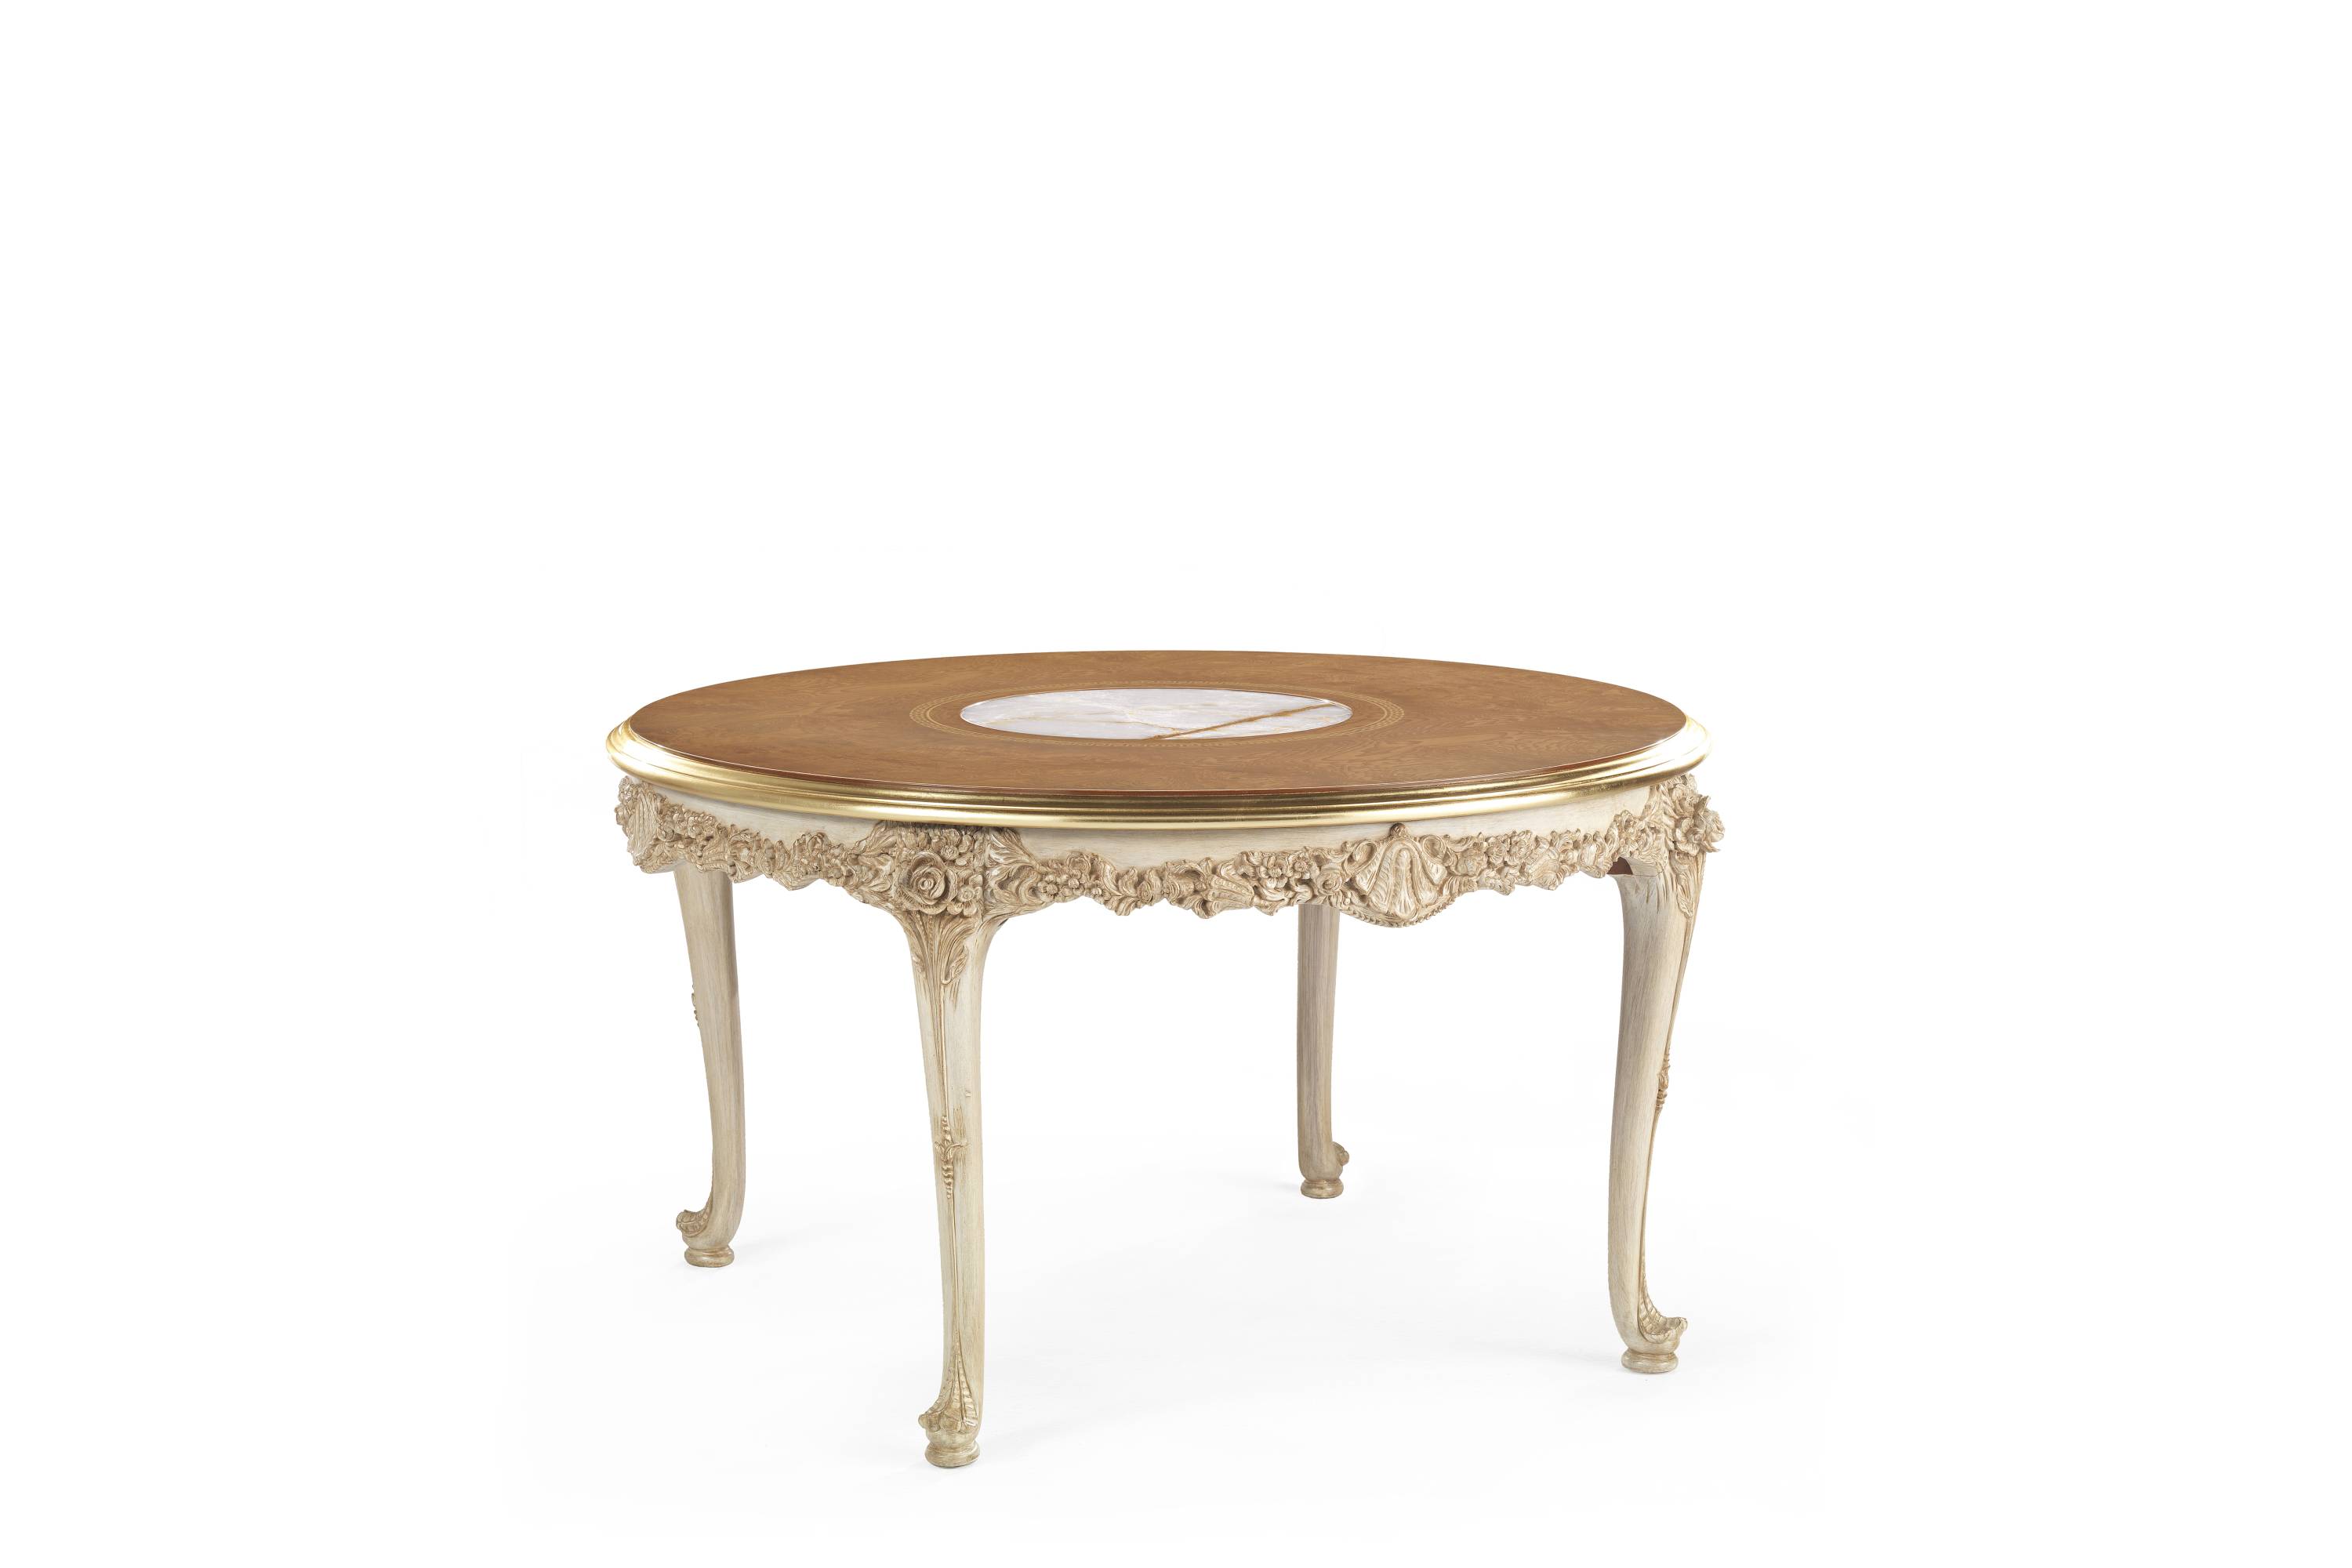 LA GRANDE DAME dining table - Discover the elegance of luxury Domus collection by Jumbo collection